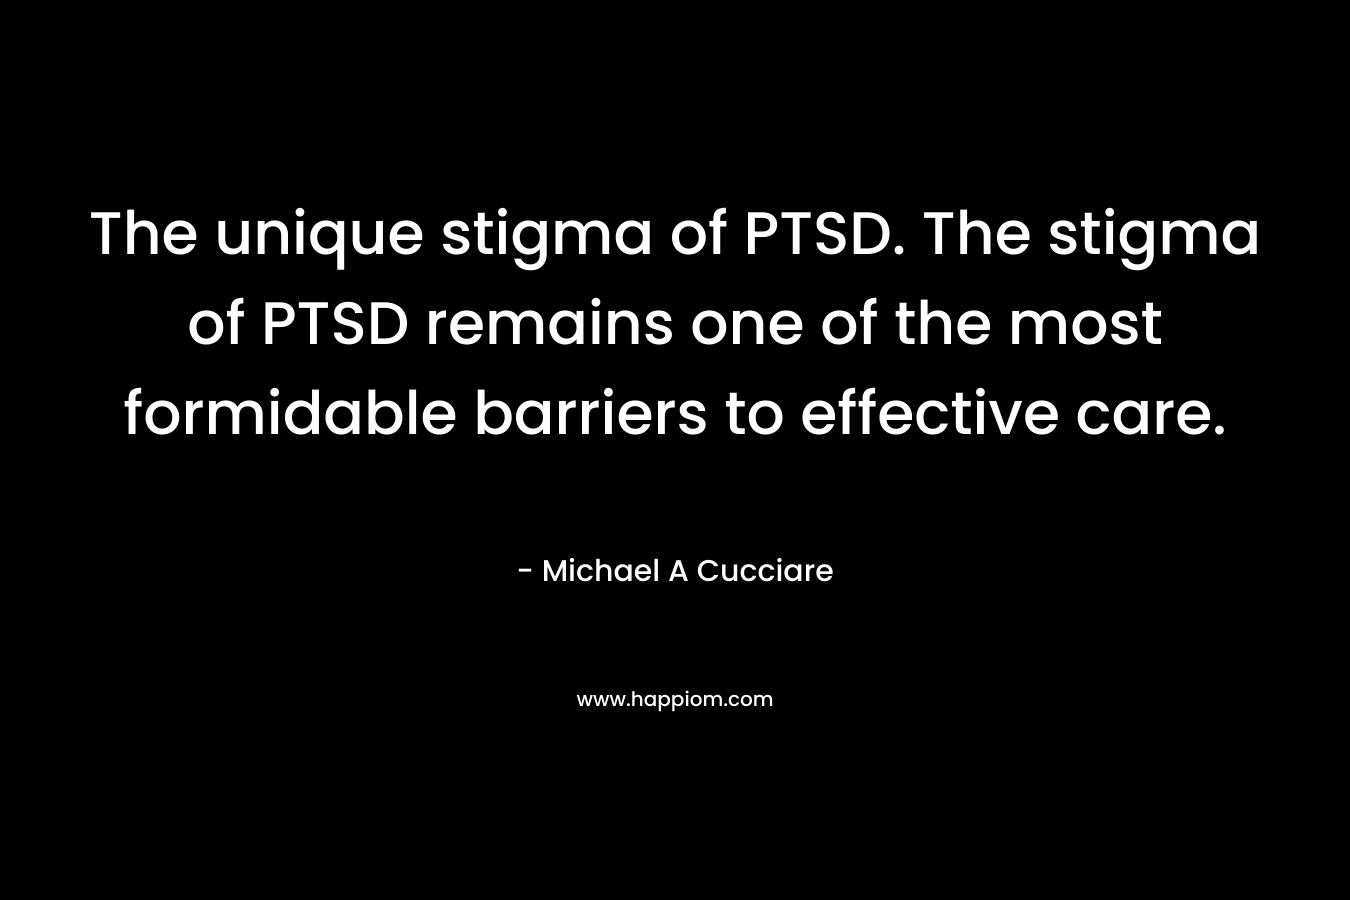 The unique stigma of PTSD. The stigma of PTSD remains one of the most formidable barriers to effective care. – Michael A Cucciare